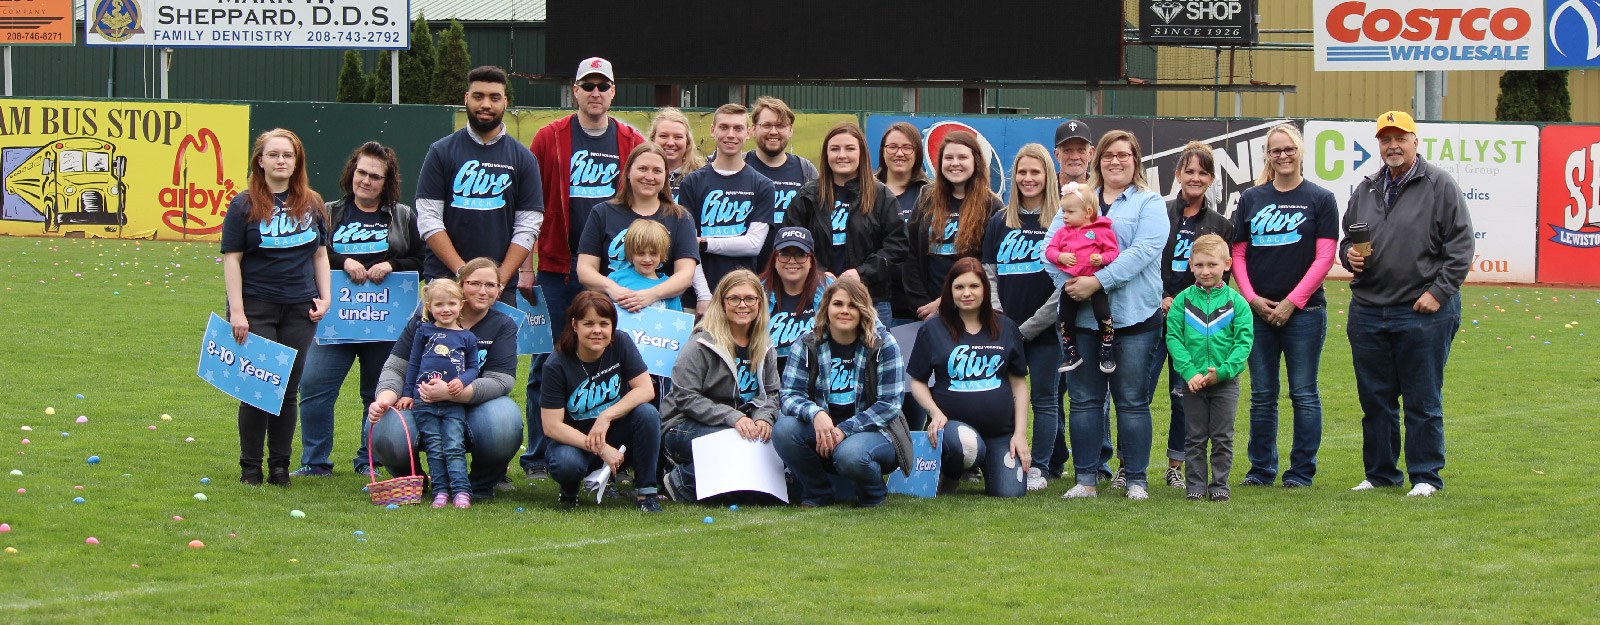 Community group photo with adults and children on sport field